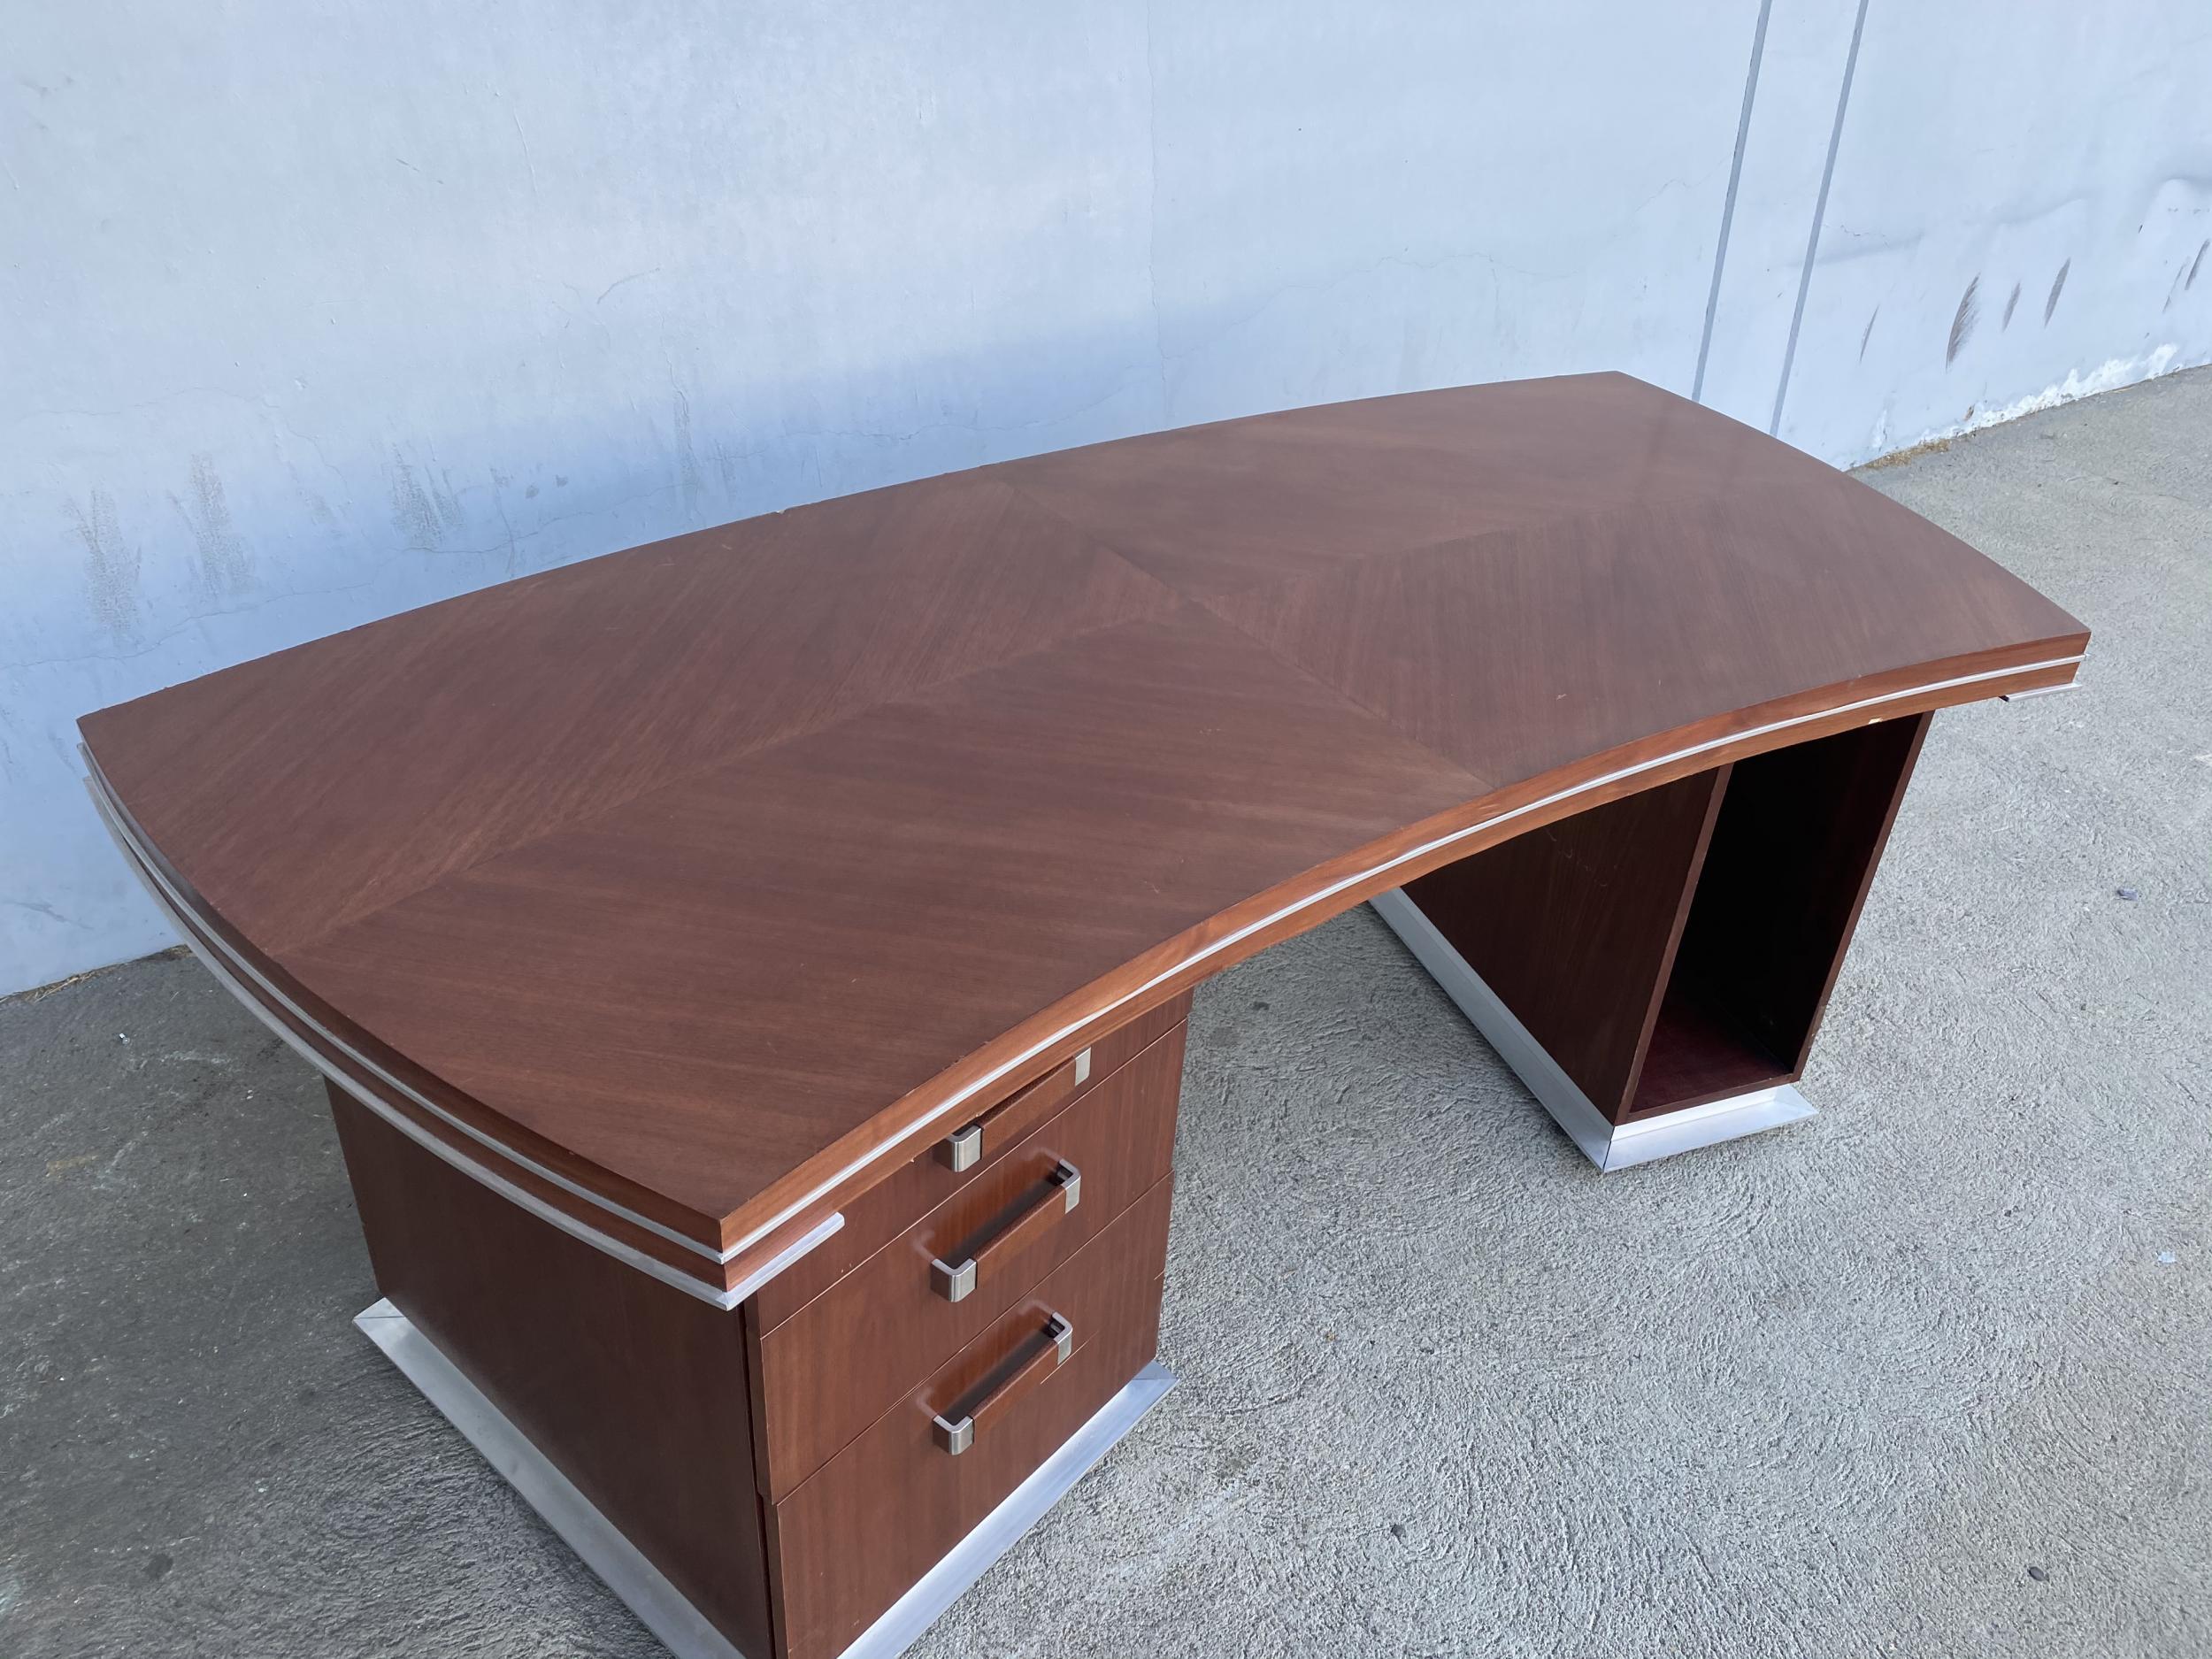 Custom made one of a kind executive desk made in the modern style sometime in the mid-1990s with a slight Art Deco flair. The desk features 3 drawers to the left and a place for a computer tower on the right. The desk has a heavy aluminum trim and